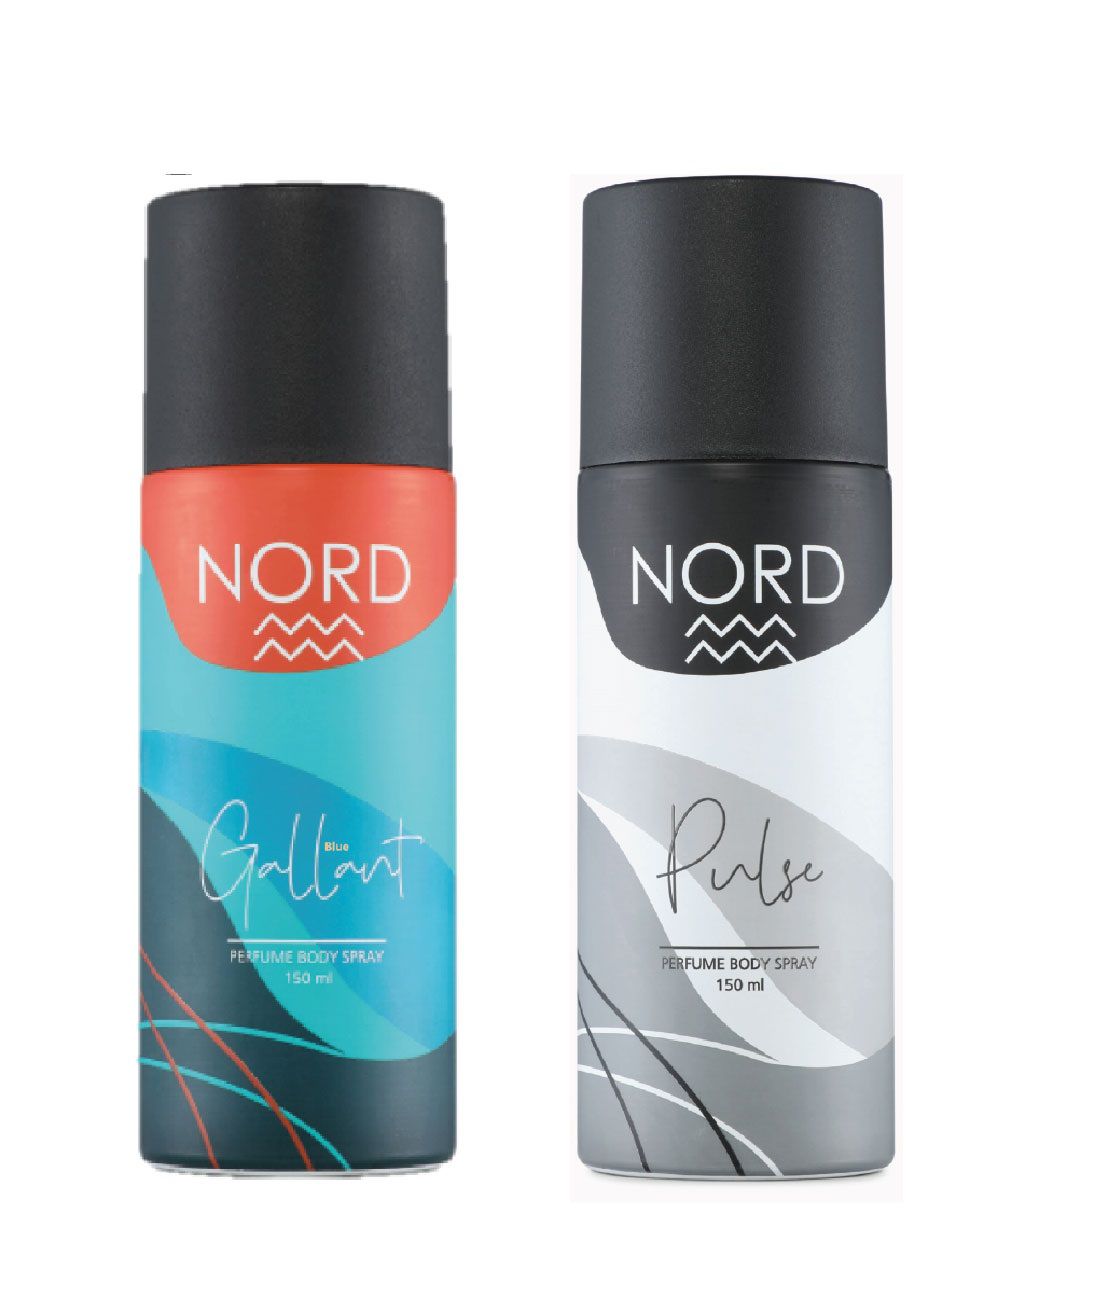     			NORD Deodorant Body Spray - Gallant and Pulse 150 ml each (Pack of 2)